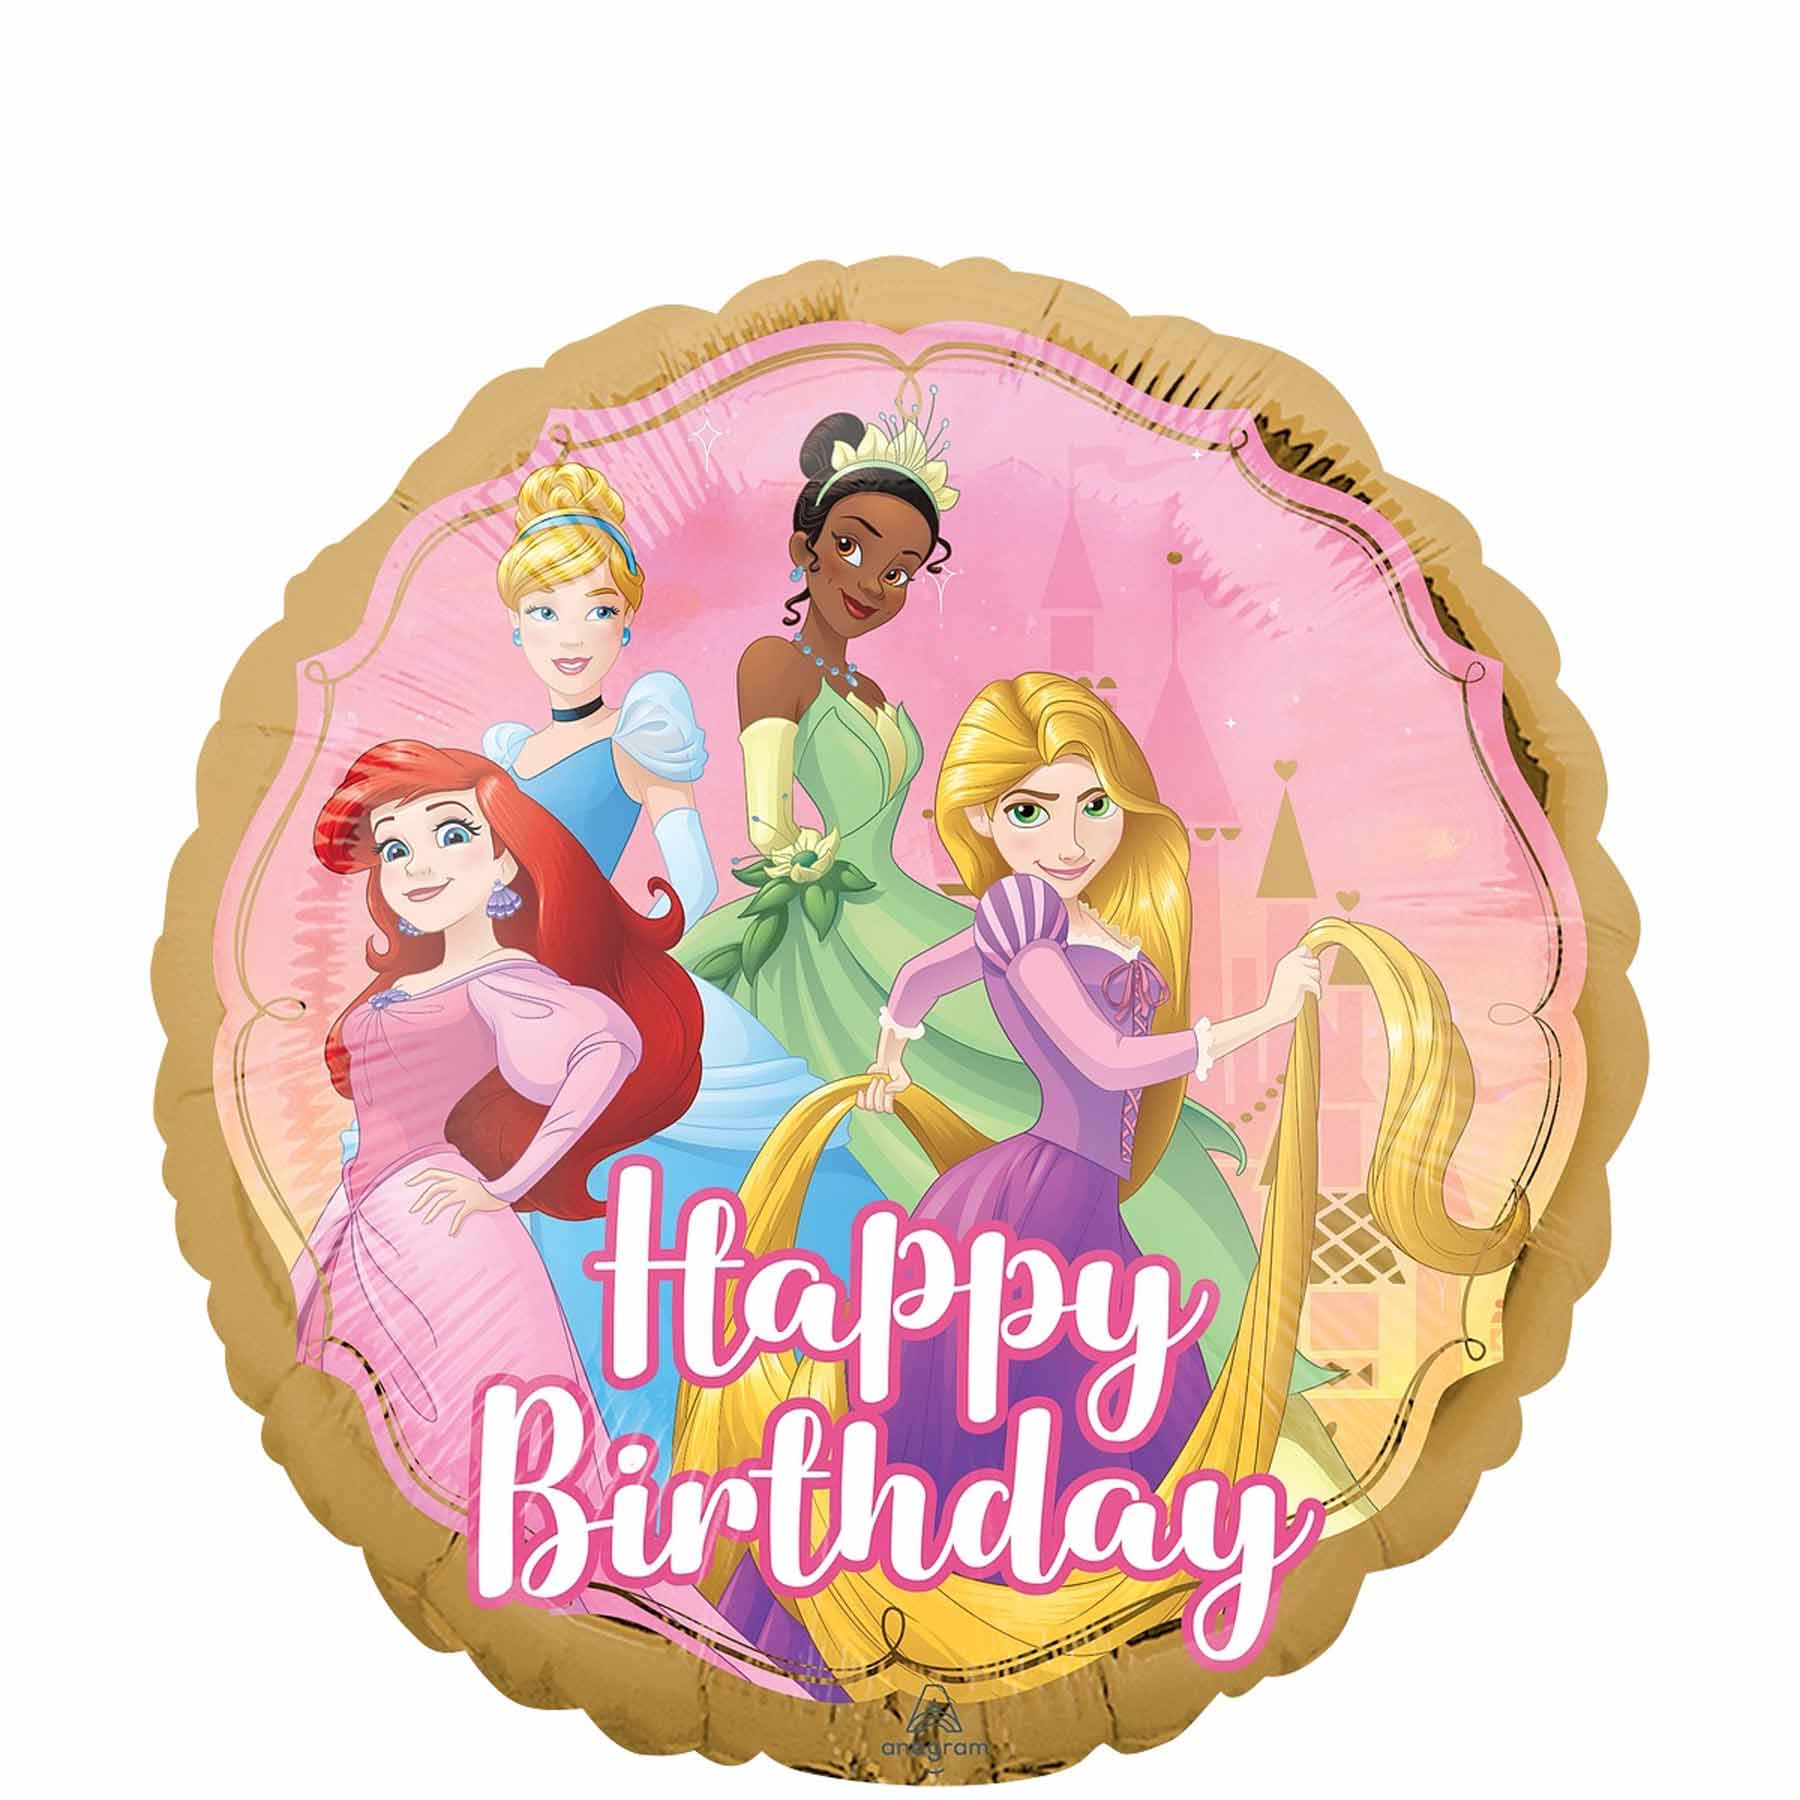 Princess Once Upon A Time Birthday Foil Balloon 18in - Party Centre